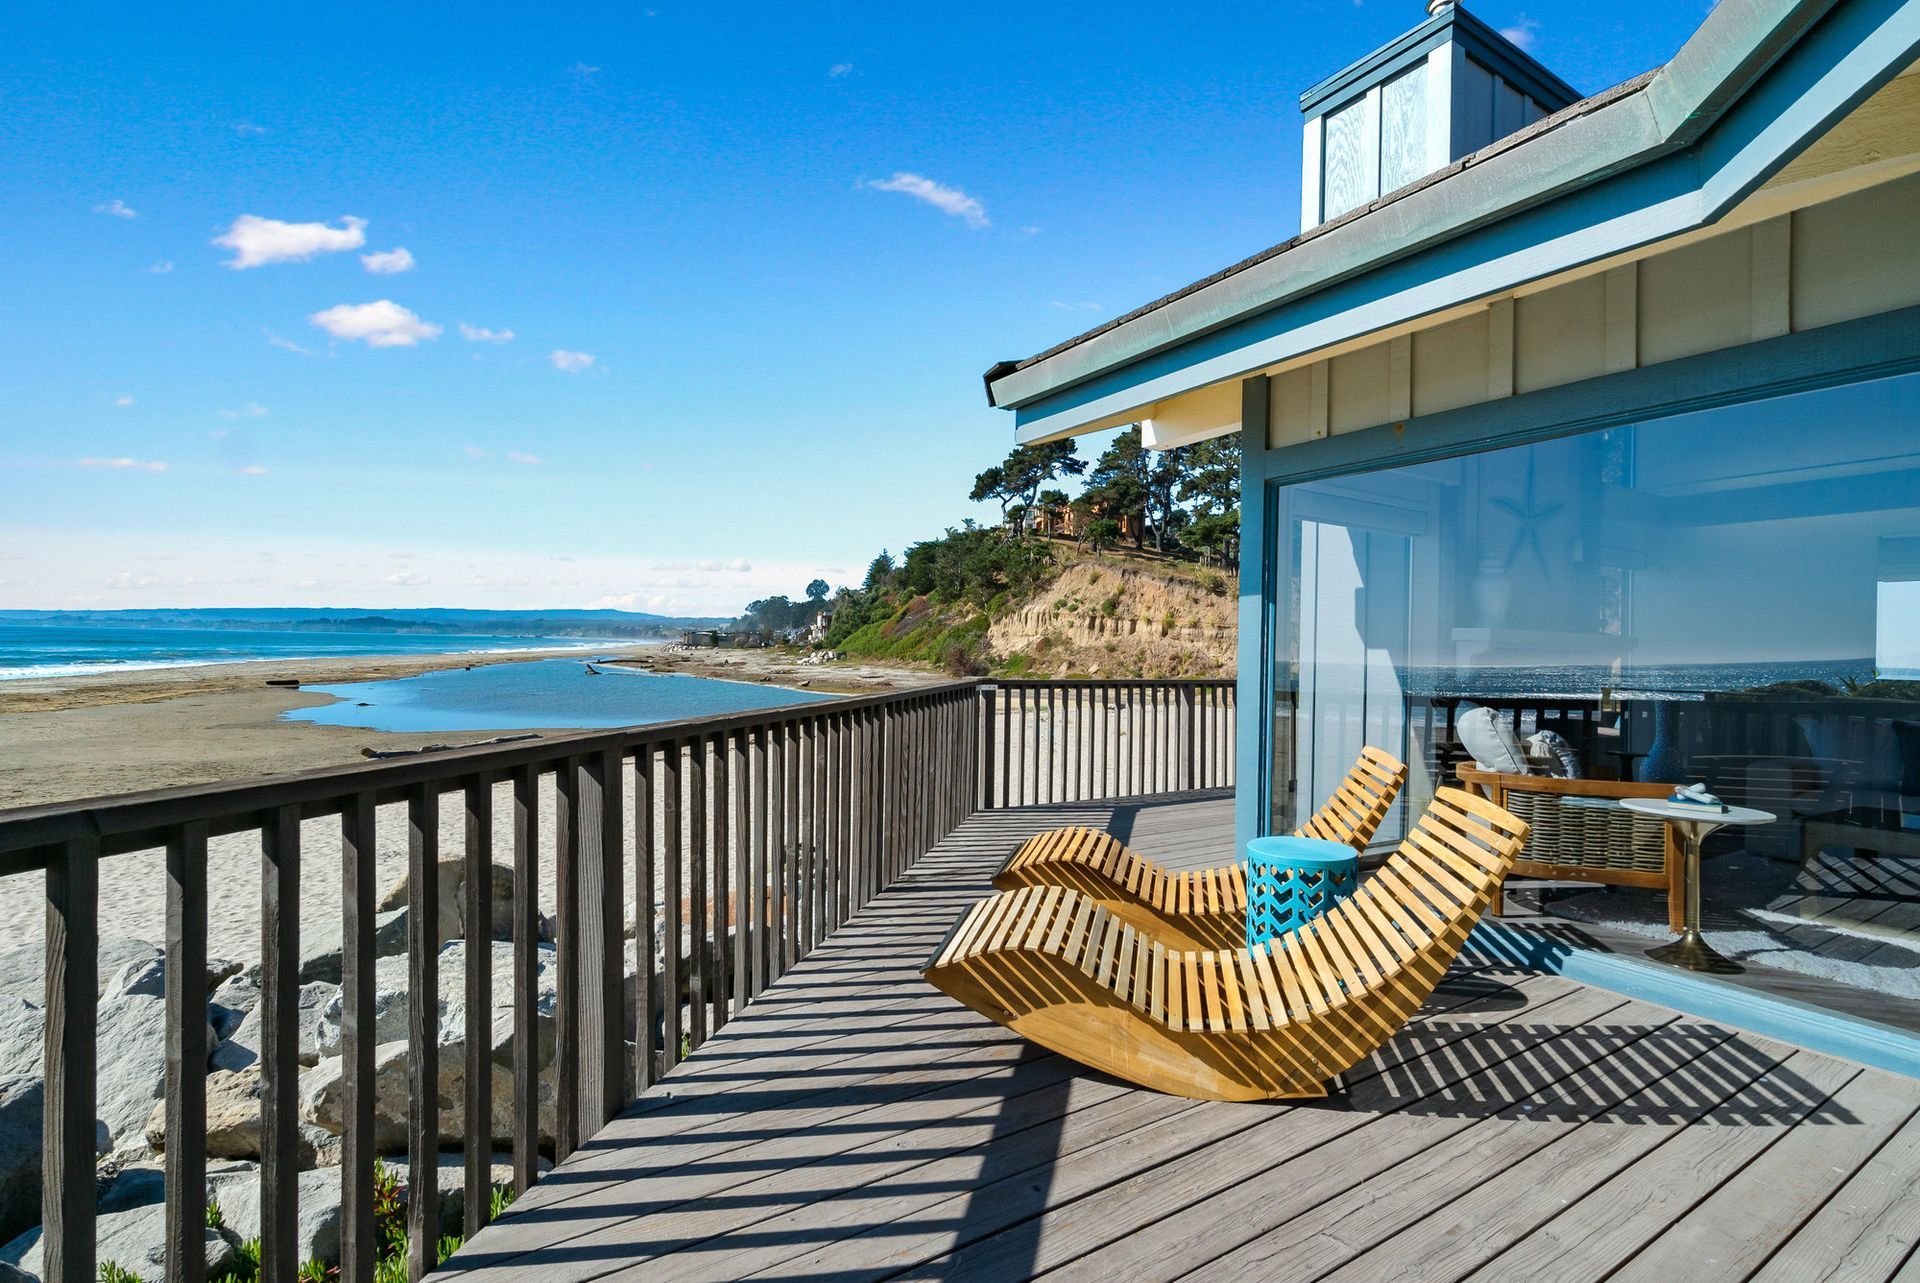 there are two chairs on the deck of a house with a view of the ocean .